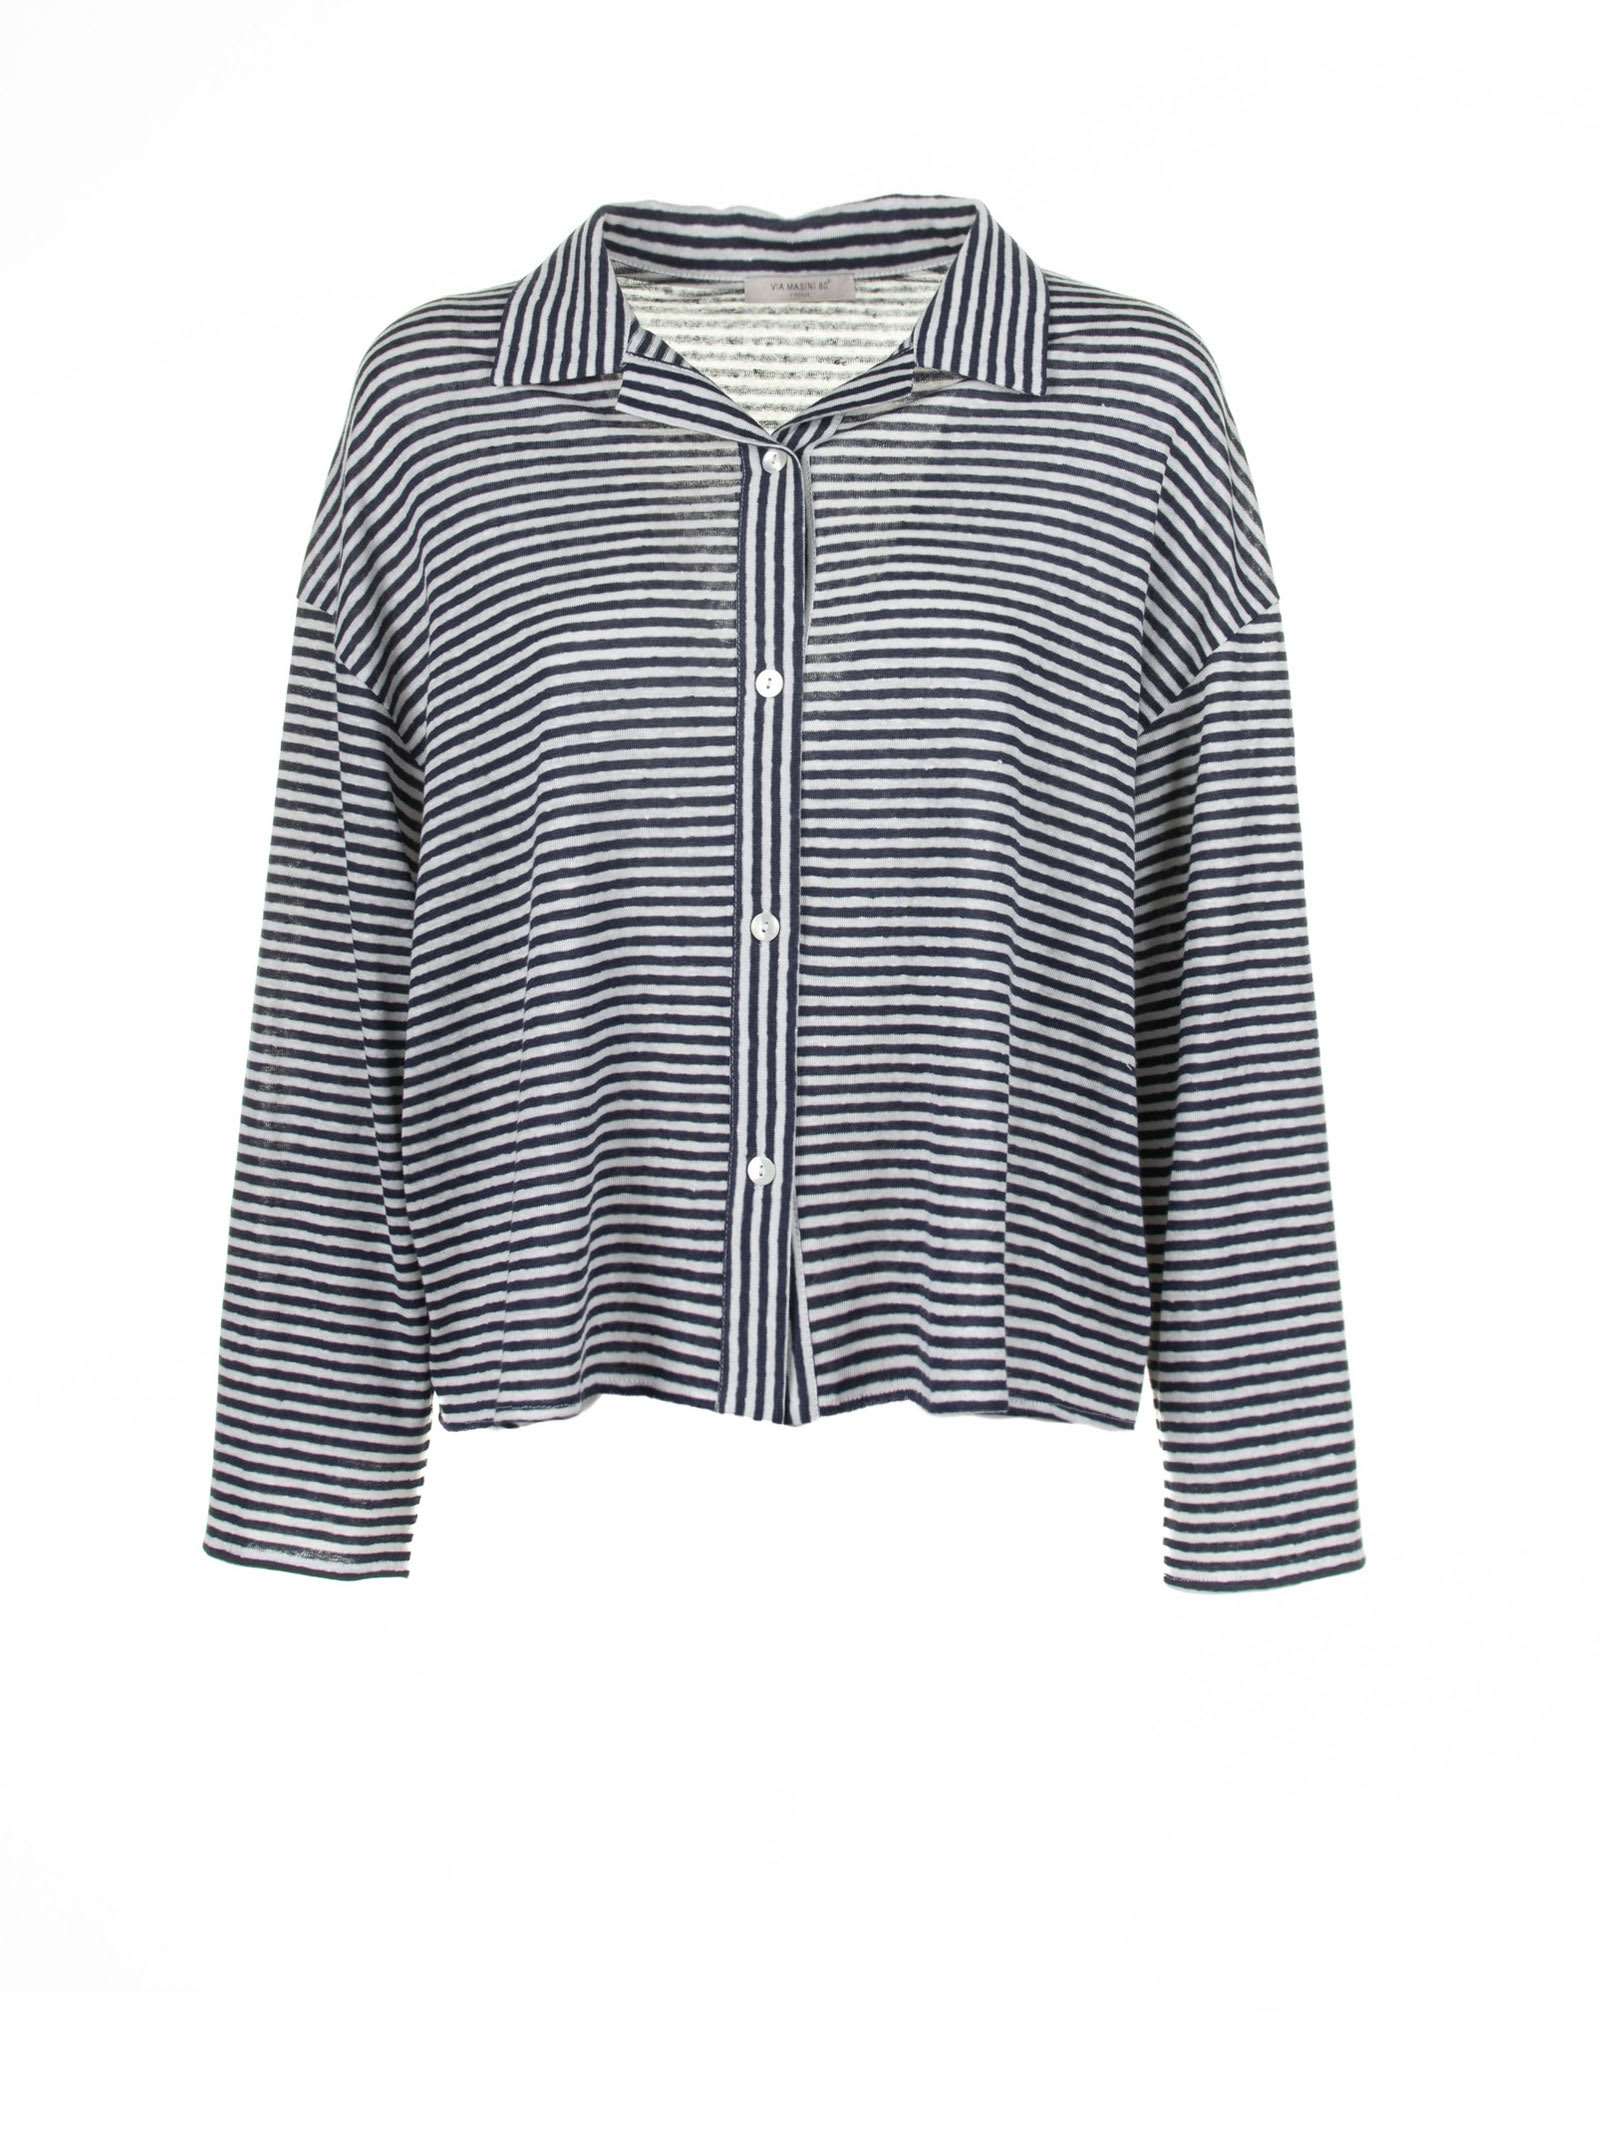 Blue And White Striped Shirt